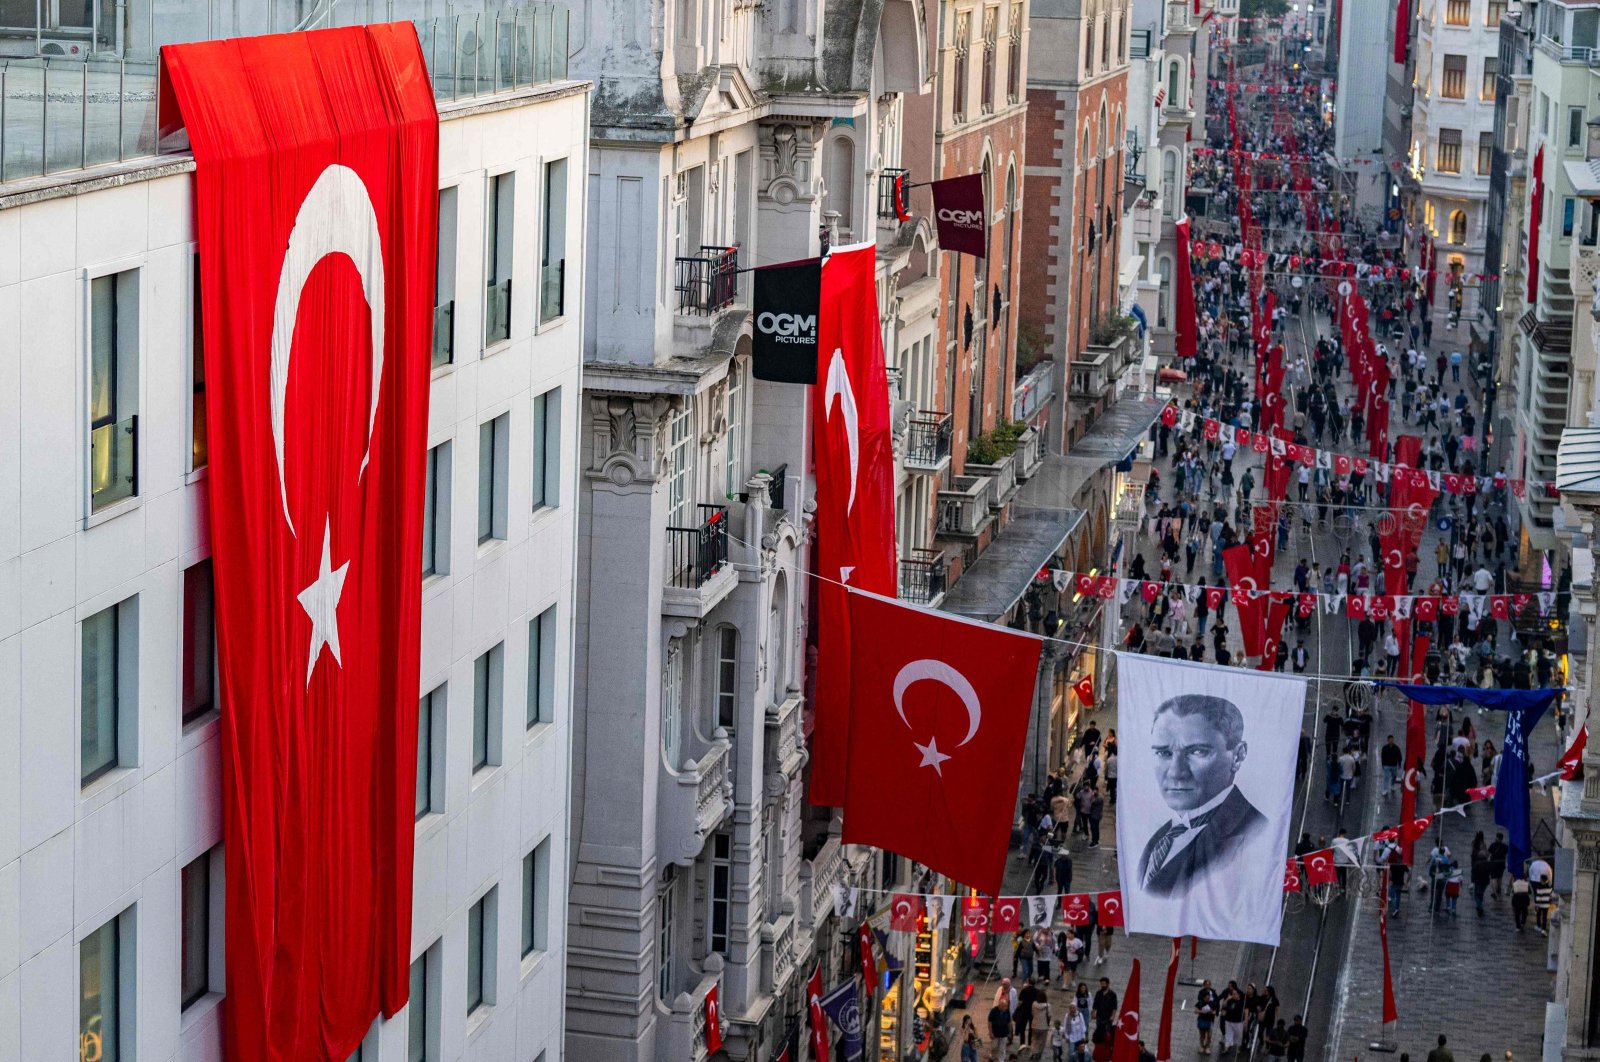 Turkish national flags and a banner depicting Mustafa Kemal Ataturk, the founding father of the Republic of Türkiye, are displayed on Istiklal Avenue, during celebrations to mark the 100th anniversary of the Turkish Republic, in Istanbul, Türkiye, Oct. 29, 2023. (AFP Photo)